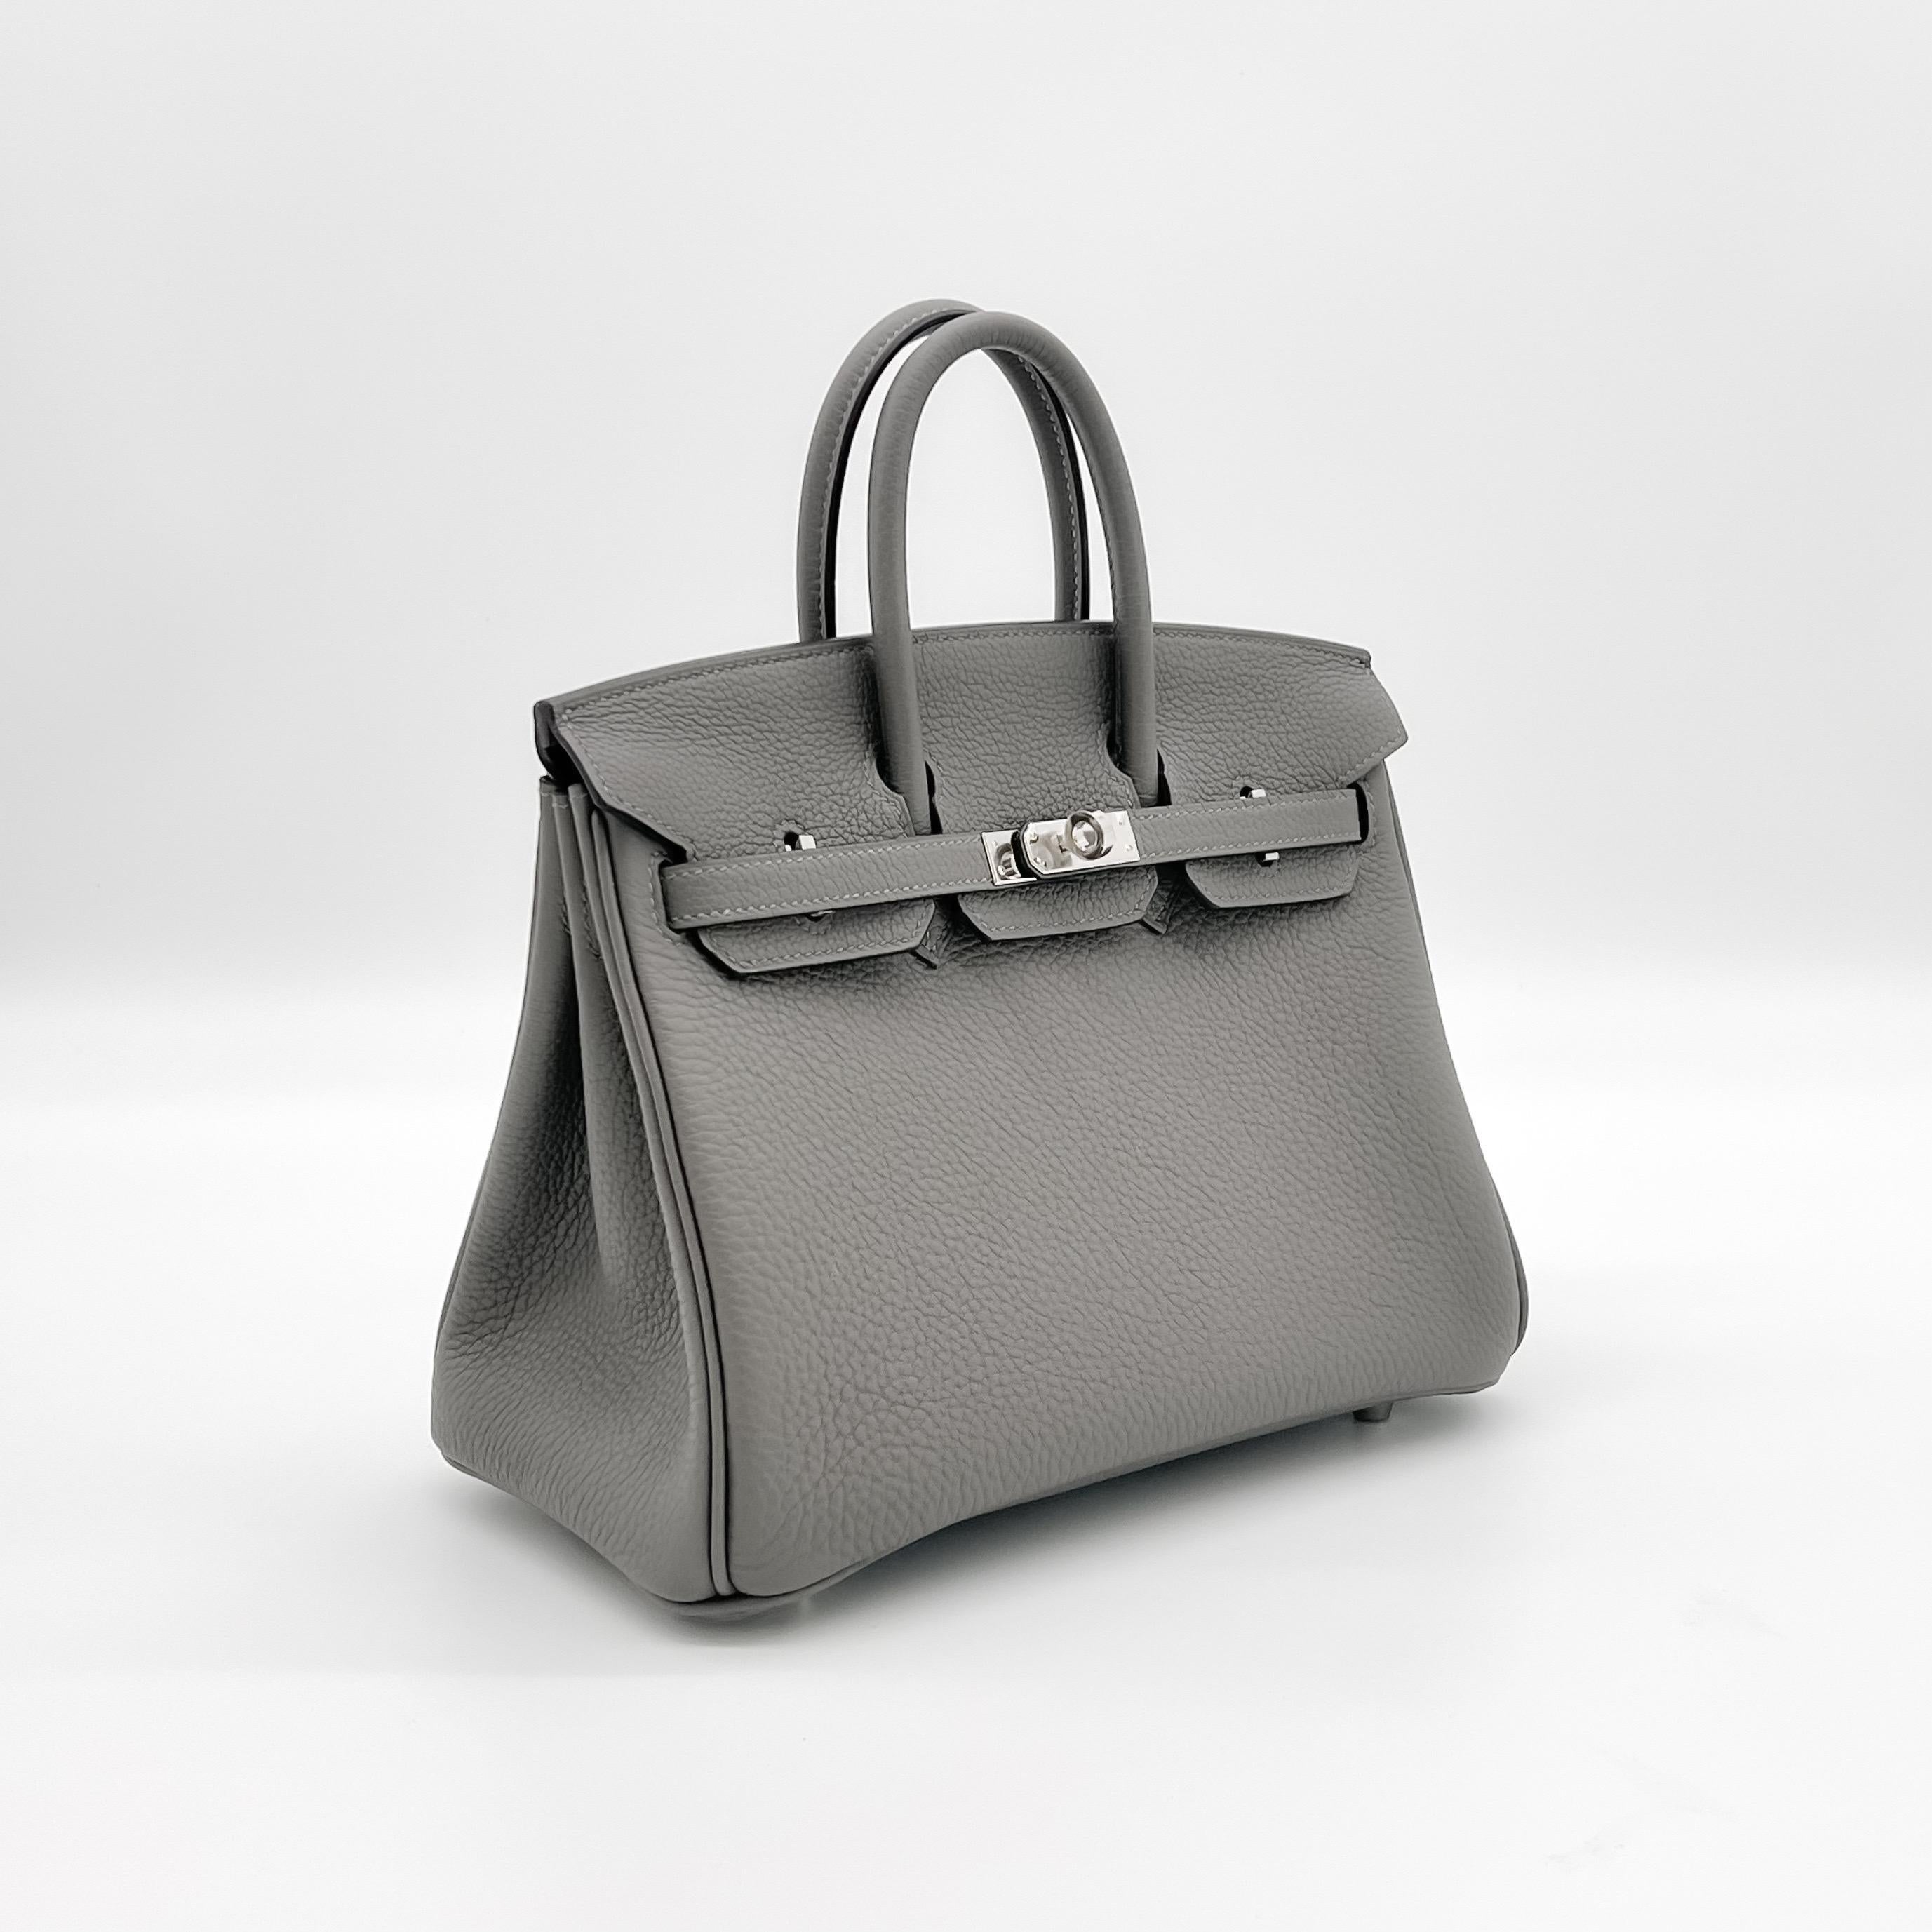 2022 Limited Colour Birkin 25. This beautiful Birkin 25 comes in Gris Meyer a light grey colour. It is in Togo leather and has Palladium Hardware.

This bag is unused, brand new condition with hardware protection seals still attached. 

This item